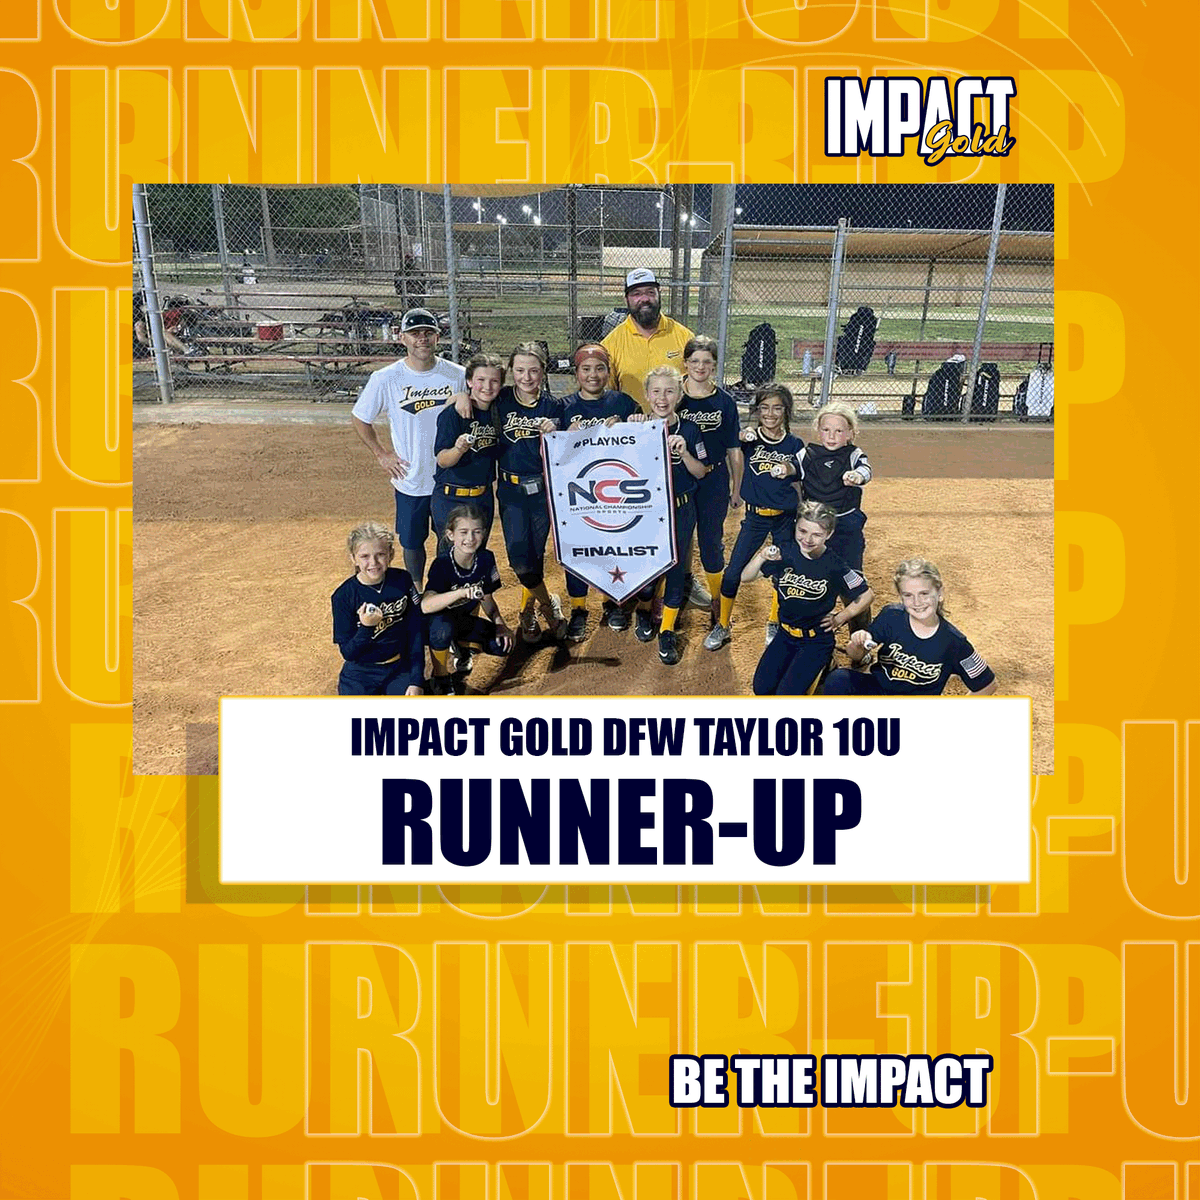 Congratulations to Impact Gold DFW Taylor 10U for placing RUNNER UP in the Lake Ray Hubbard Showdown!! Great job, ladies! #betheimpact #goldblooded #impactgolddfwtaylor10u